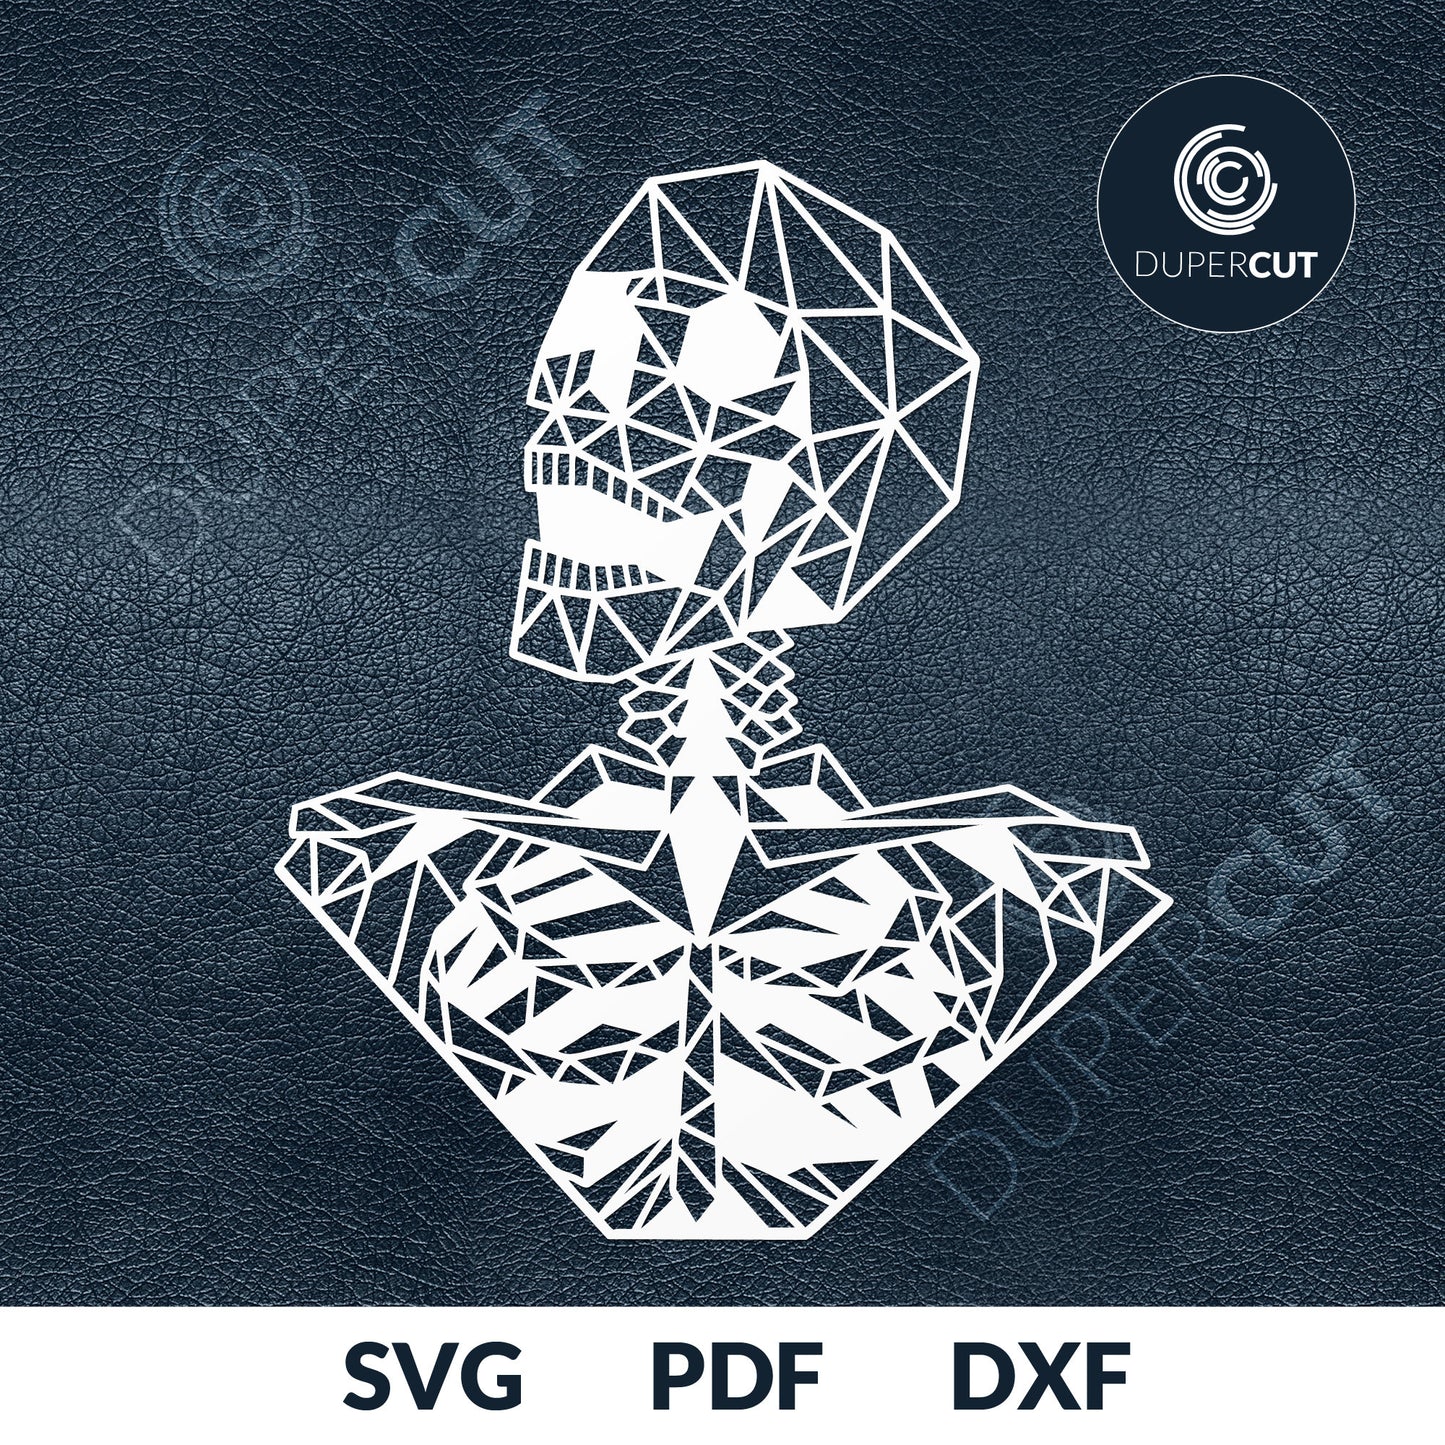 Geometric skeleton abstract - SVG DXF vector files for laser cutting and engraving by DuperCut.com